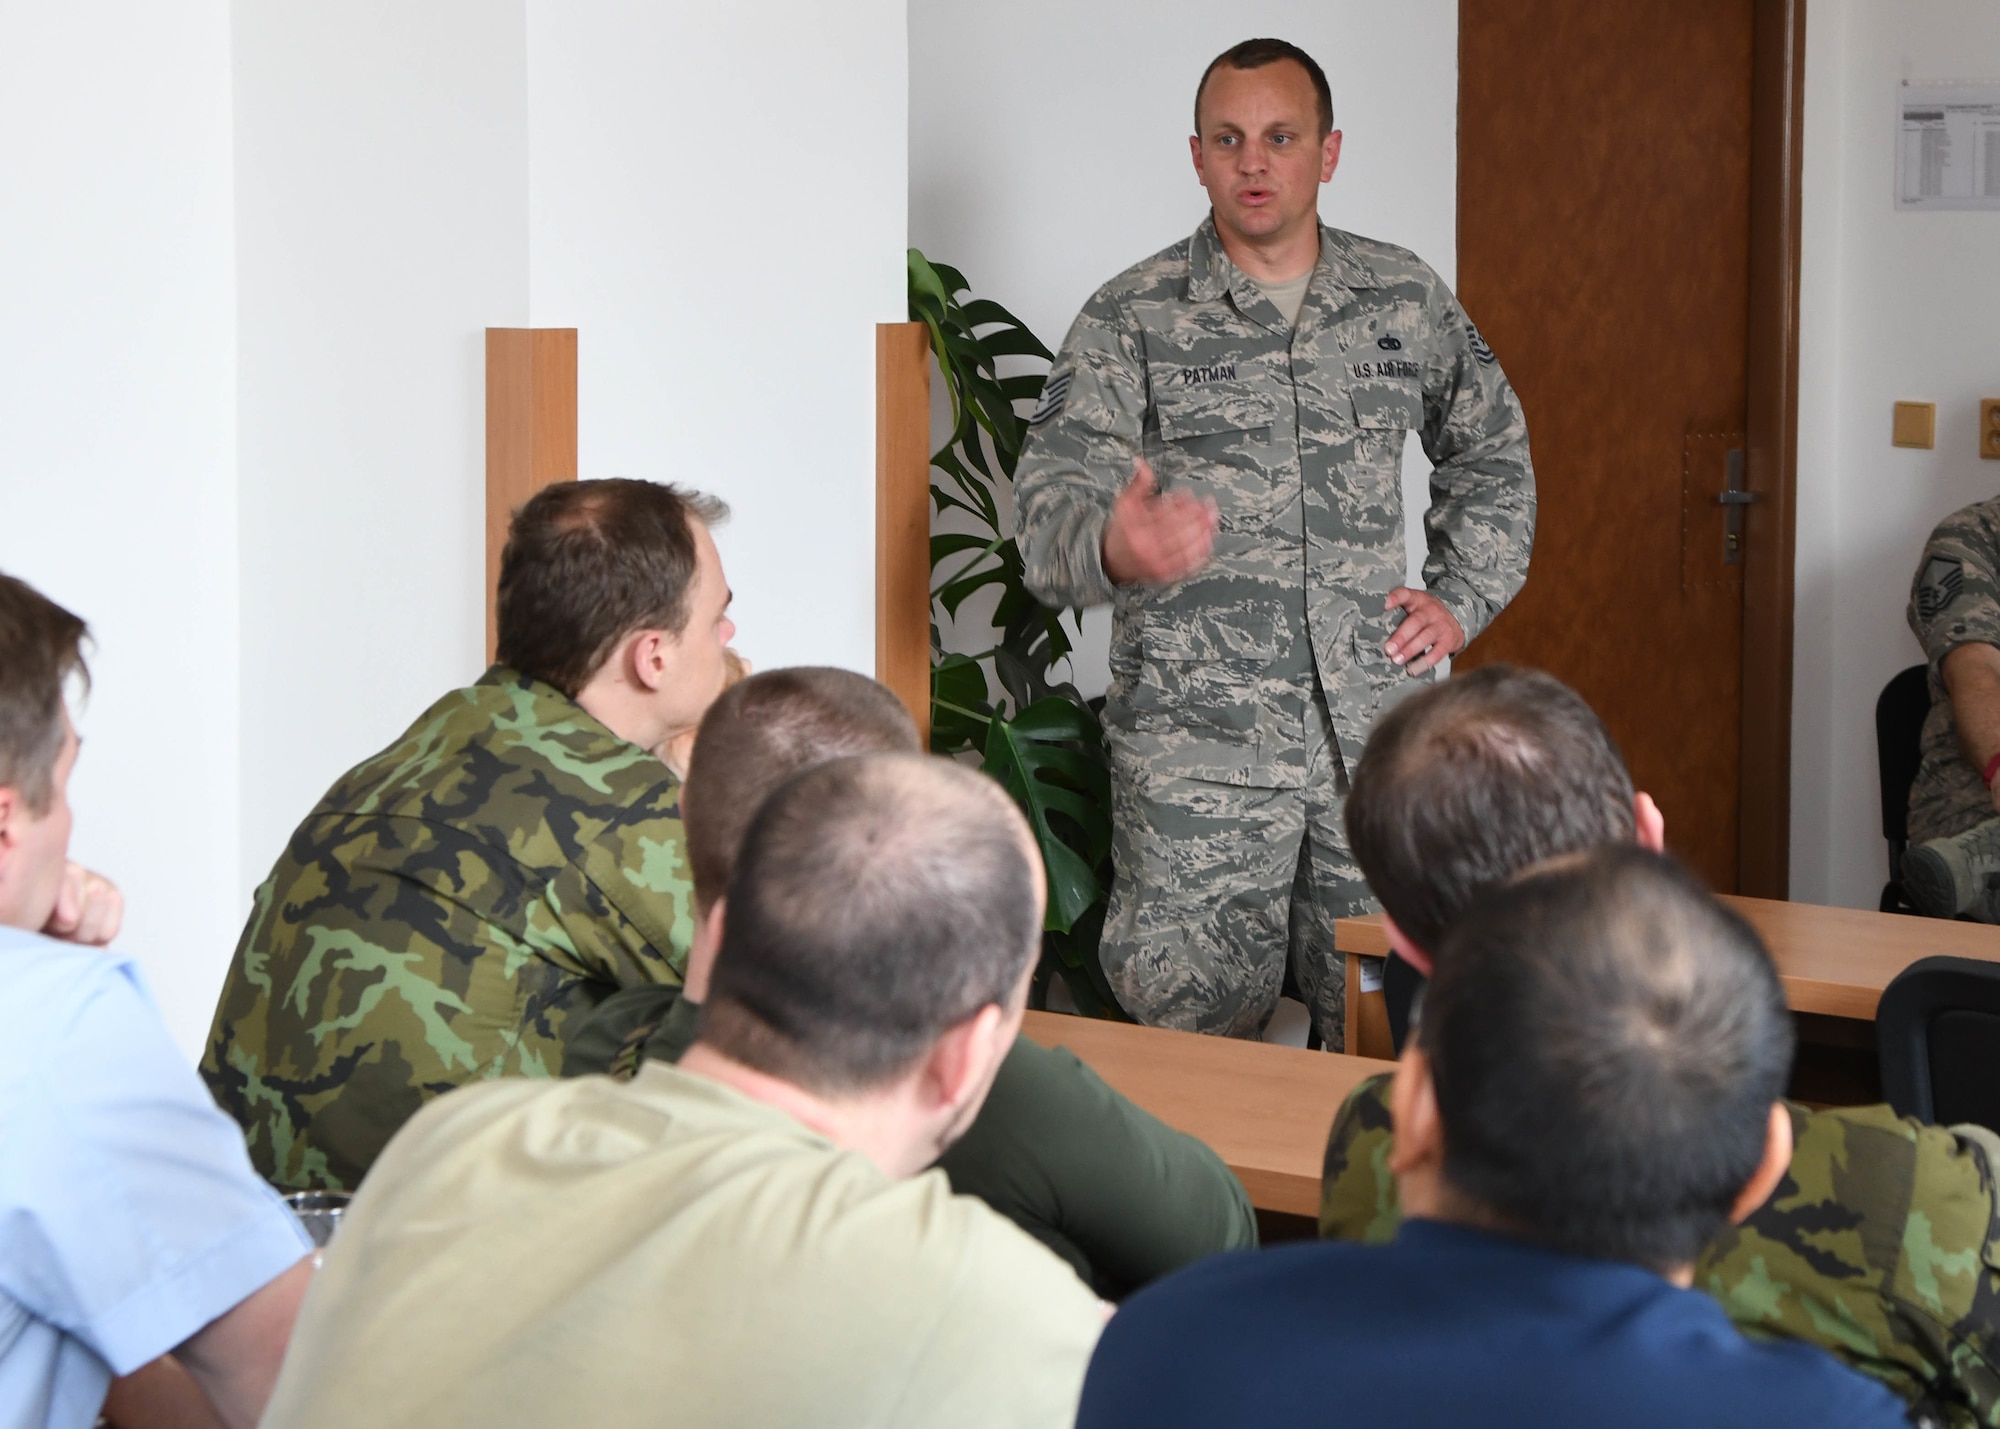 U.S. Air Force Tech Sgt. Jarrett Patman, a crew chief with the 136th Aircraft Maintenance Squadron, Texas Air National Guard, gives a briefing to a class of Czech Airmen about the 136th Airlift Wing, March 21, 2017, at the 21st Tactical Air Base, Caslav, Czech Republic. Patman represented the 136th as a subject matter expert for his career field. (Air National Guard photo by Senior Airman De’Jon Williams)